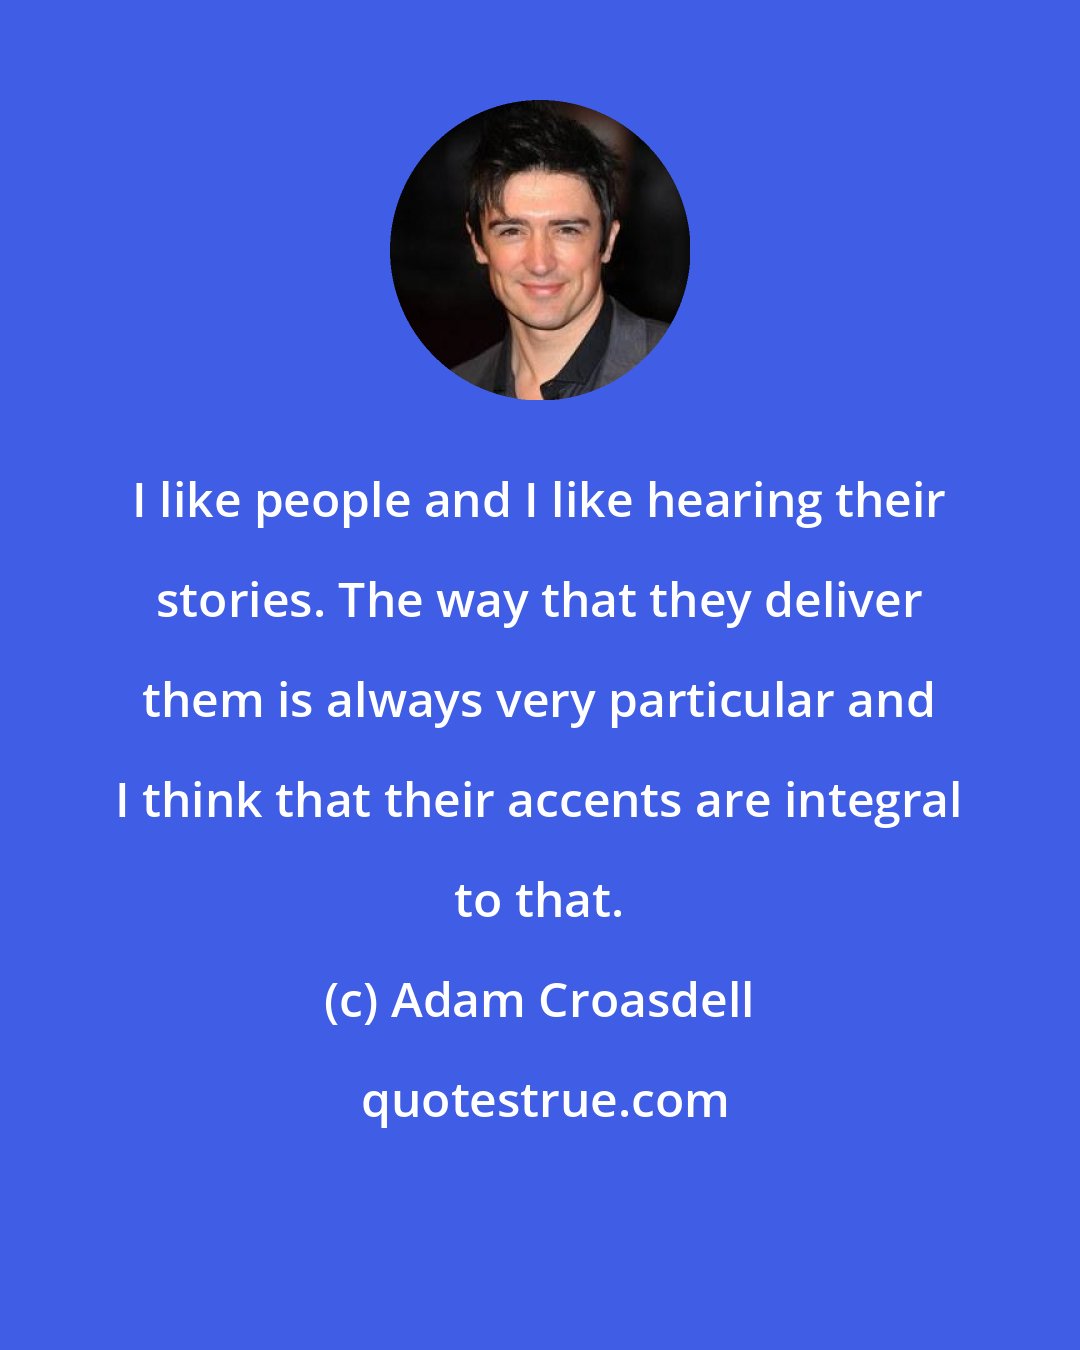 Adam Croasdell: I like people and I like hearing their stories. The way that they deliver them is always very particular and I think that their accents are integral to that.